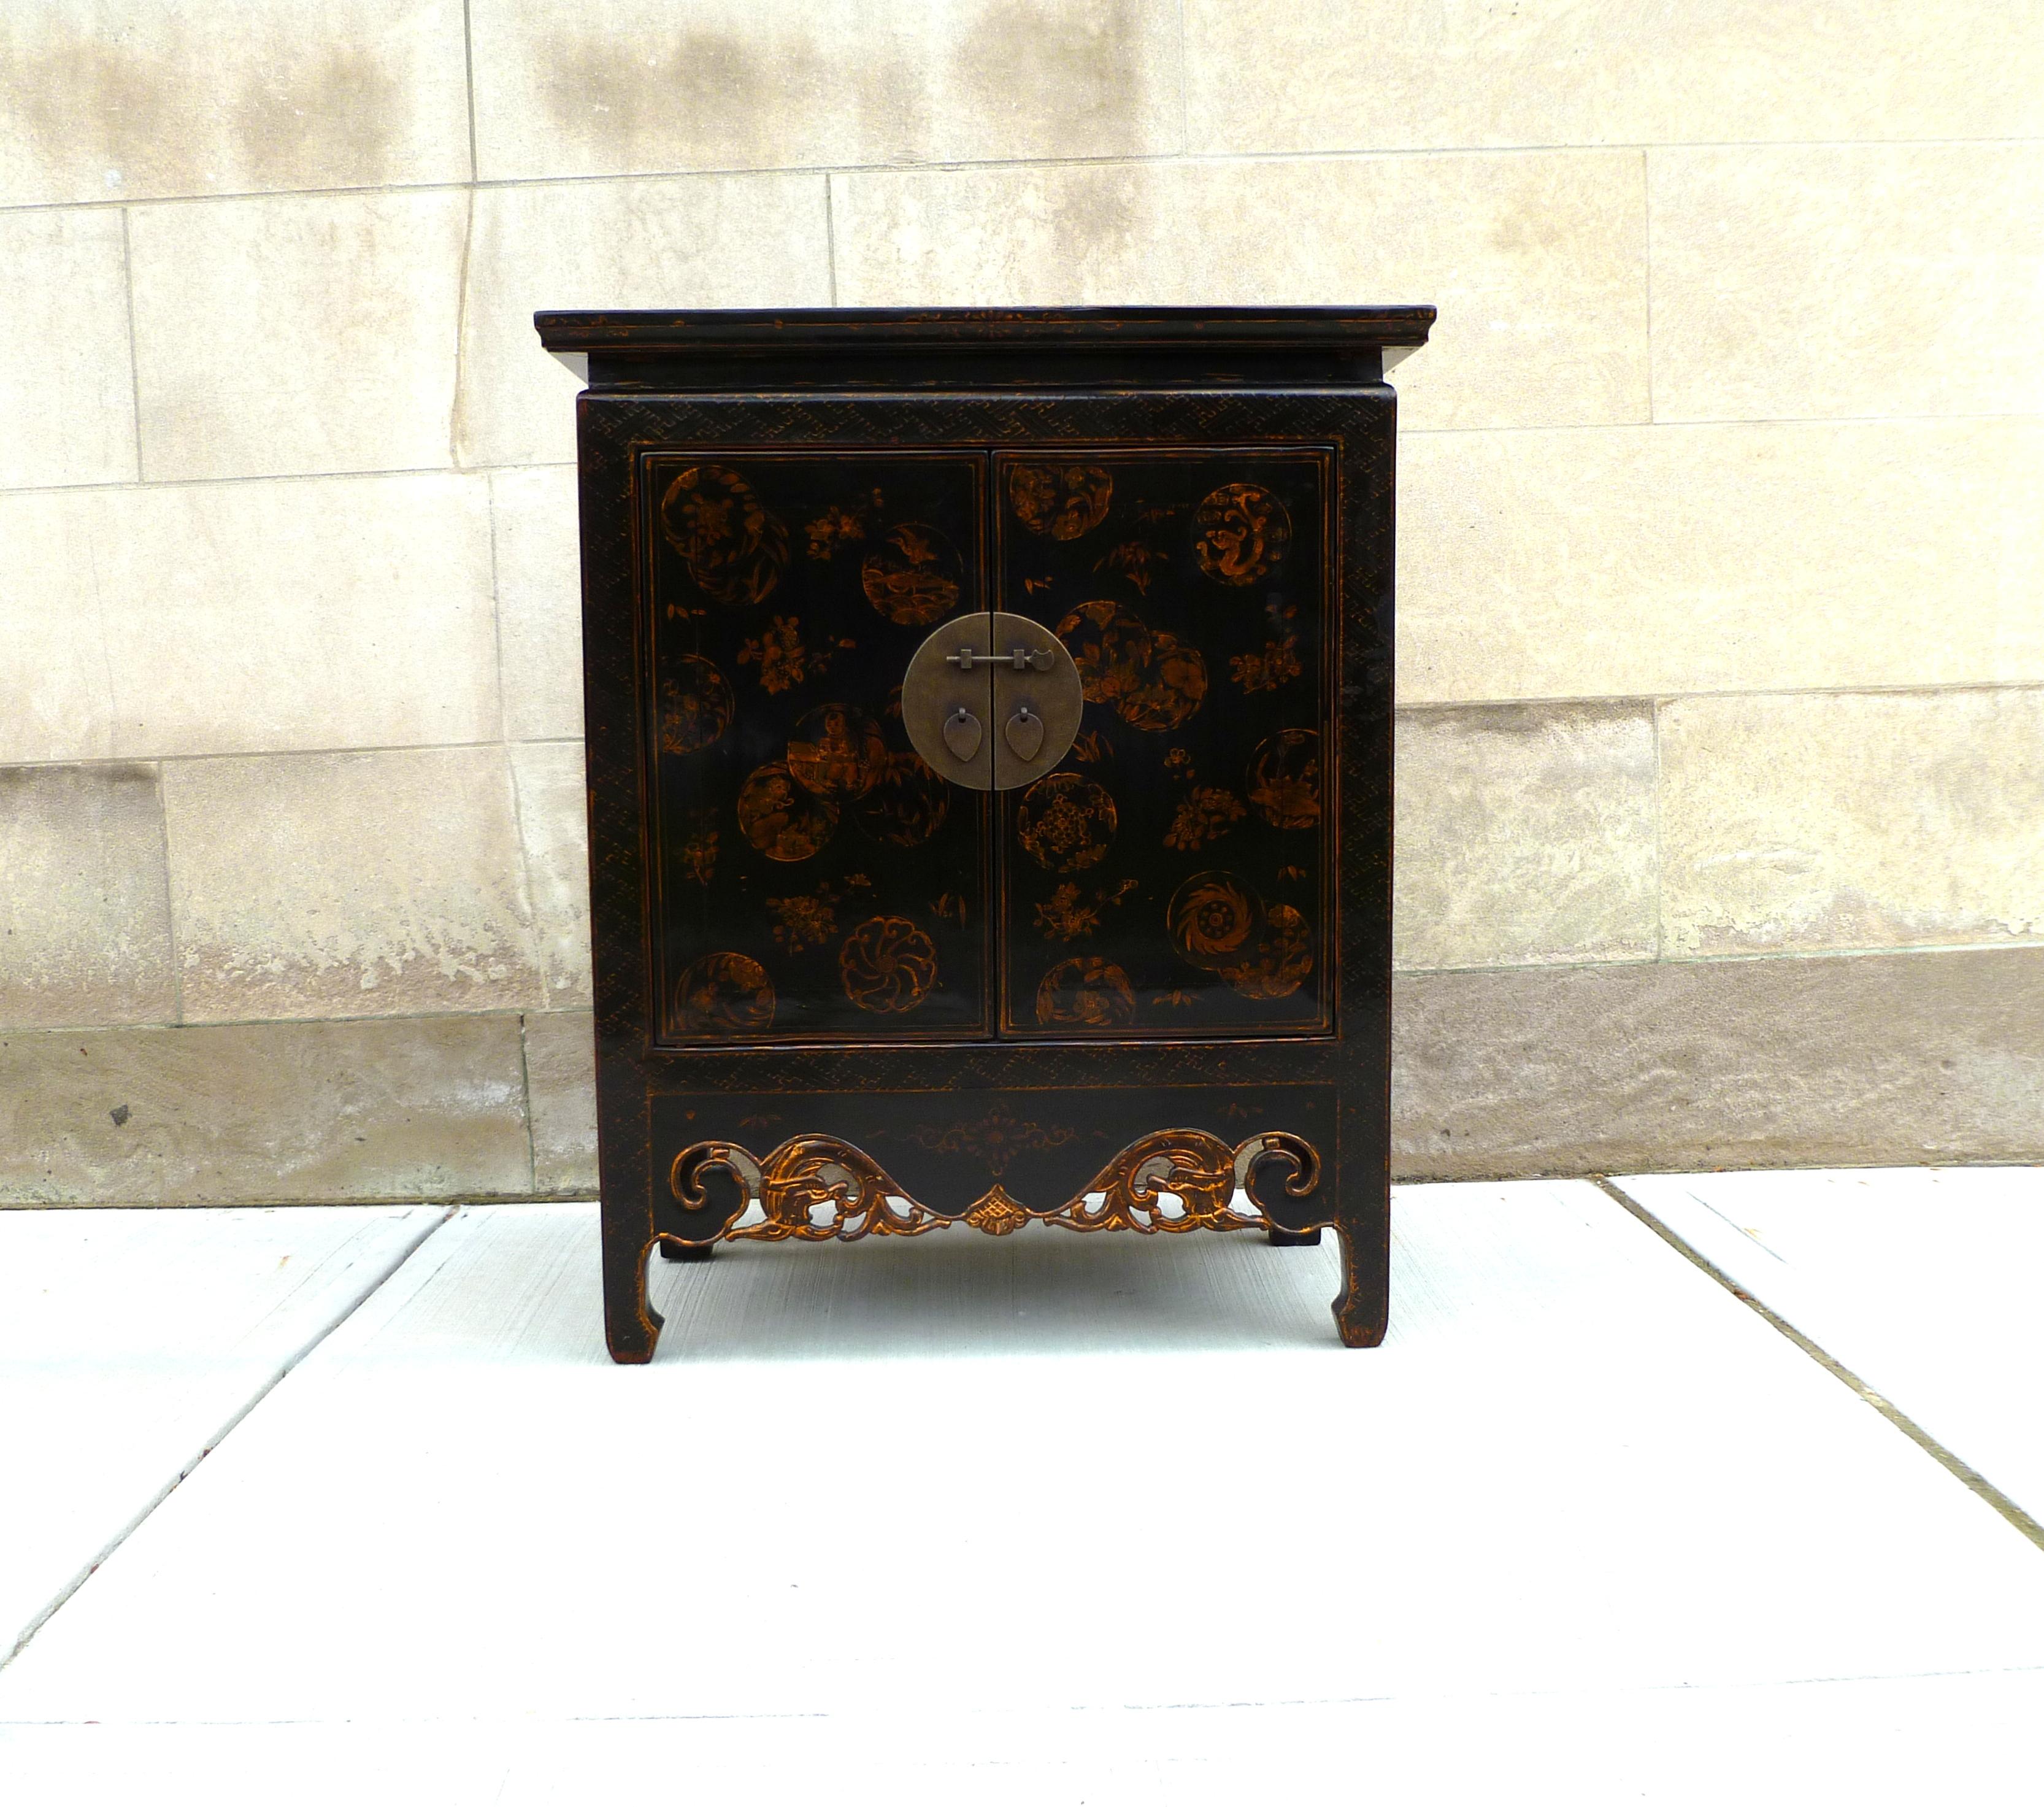 Black Lacquer cabinet with gilt motif, pair of doors and shelf inside.